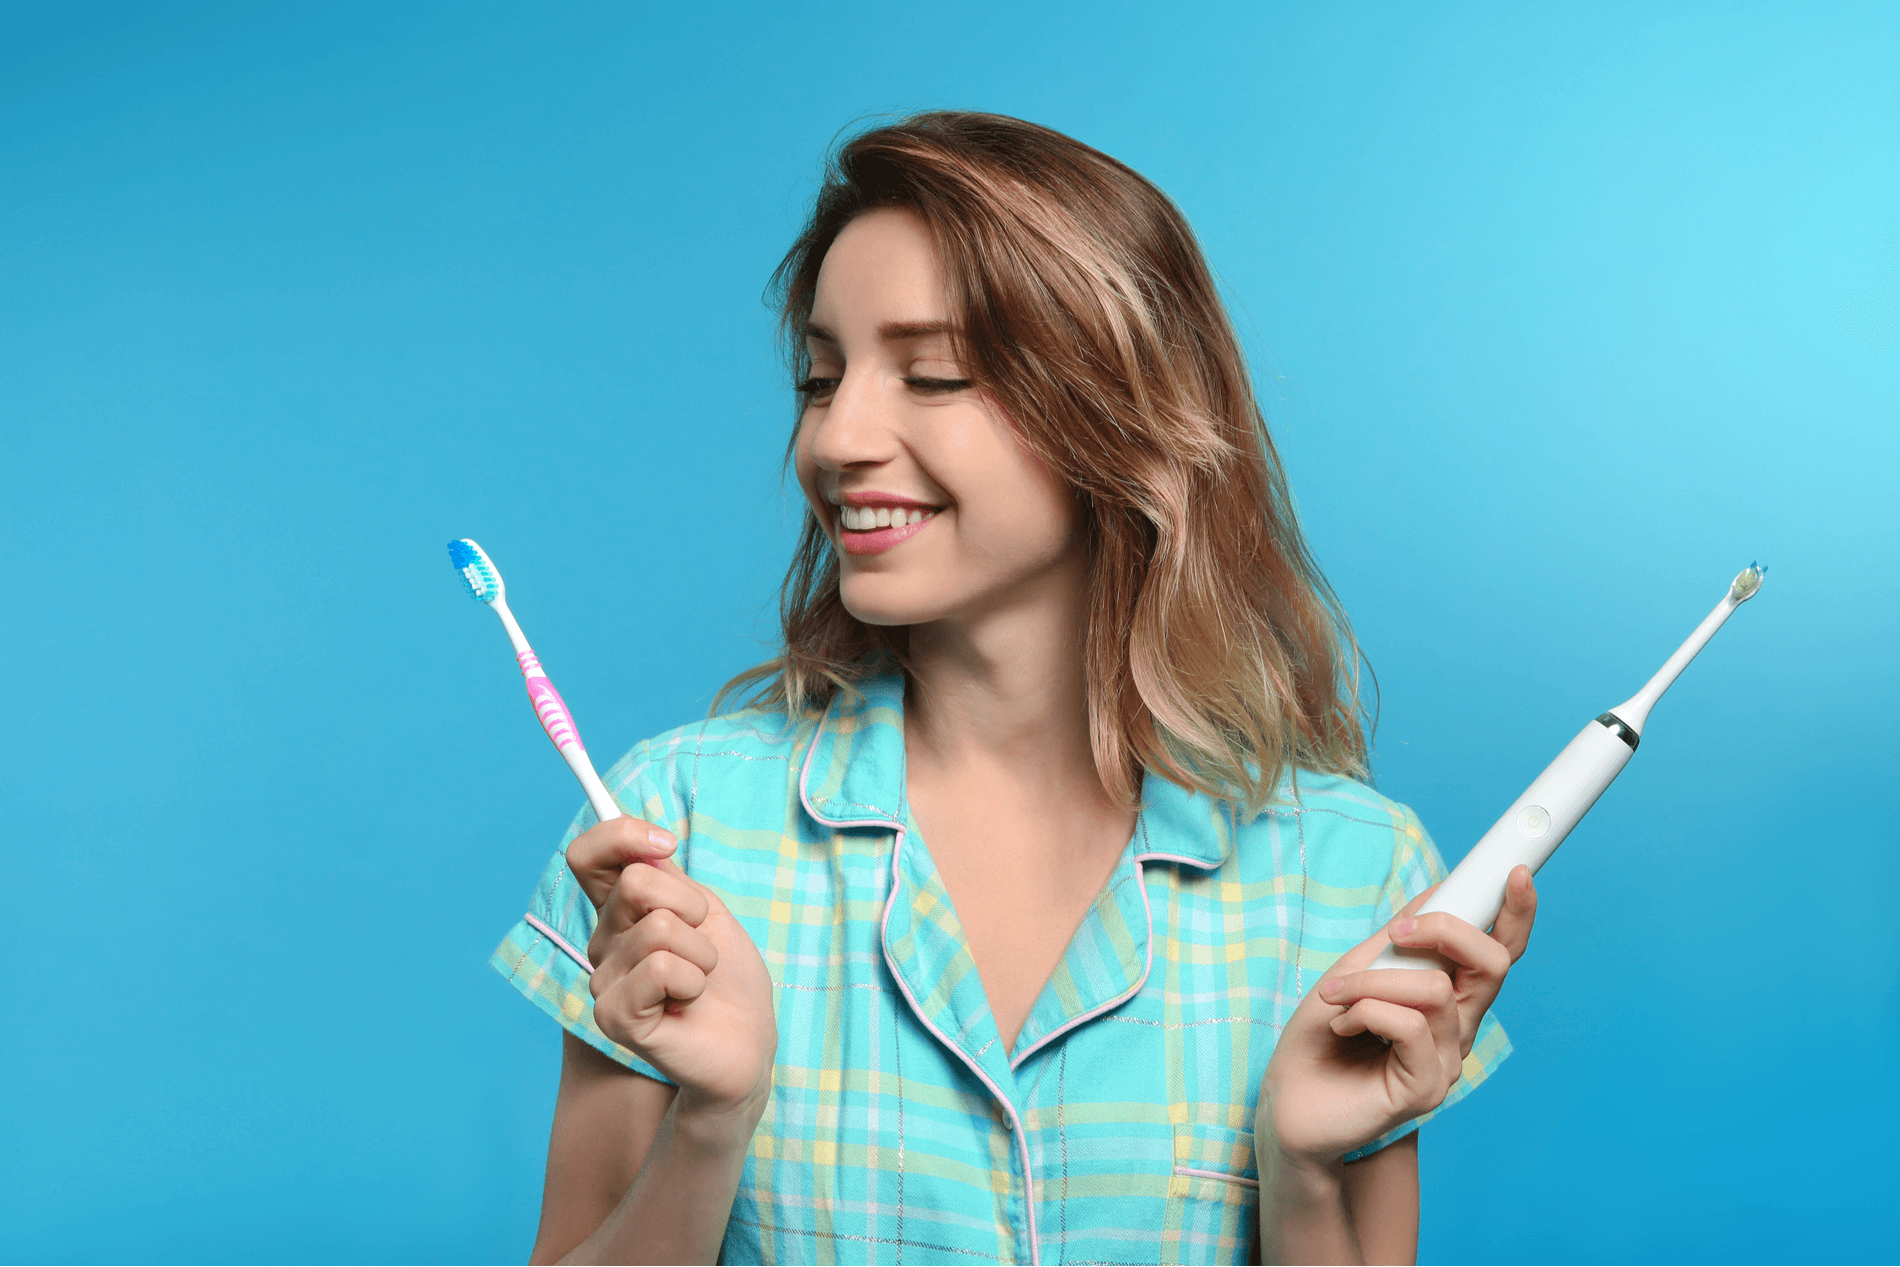 Is An Electric Toothbrush Actually Better?